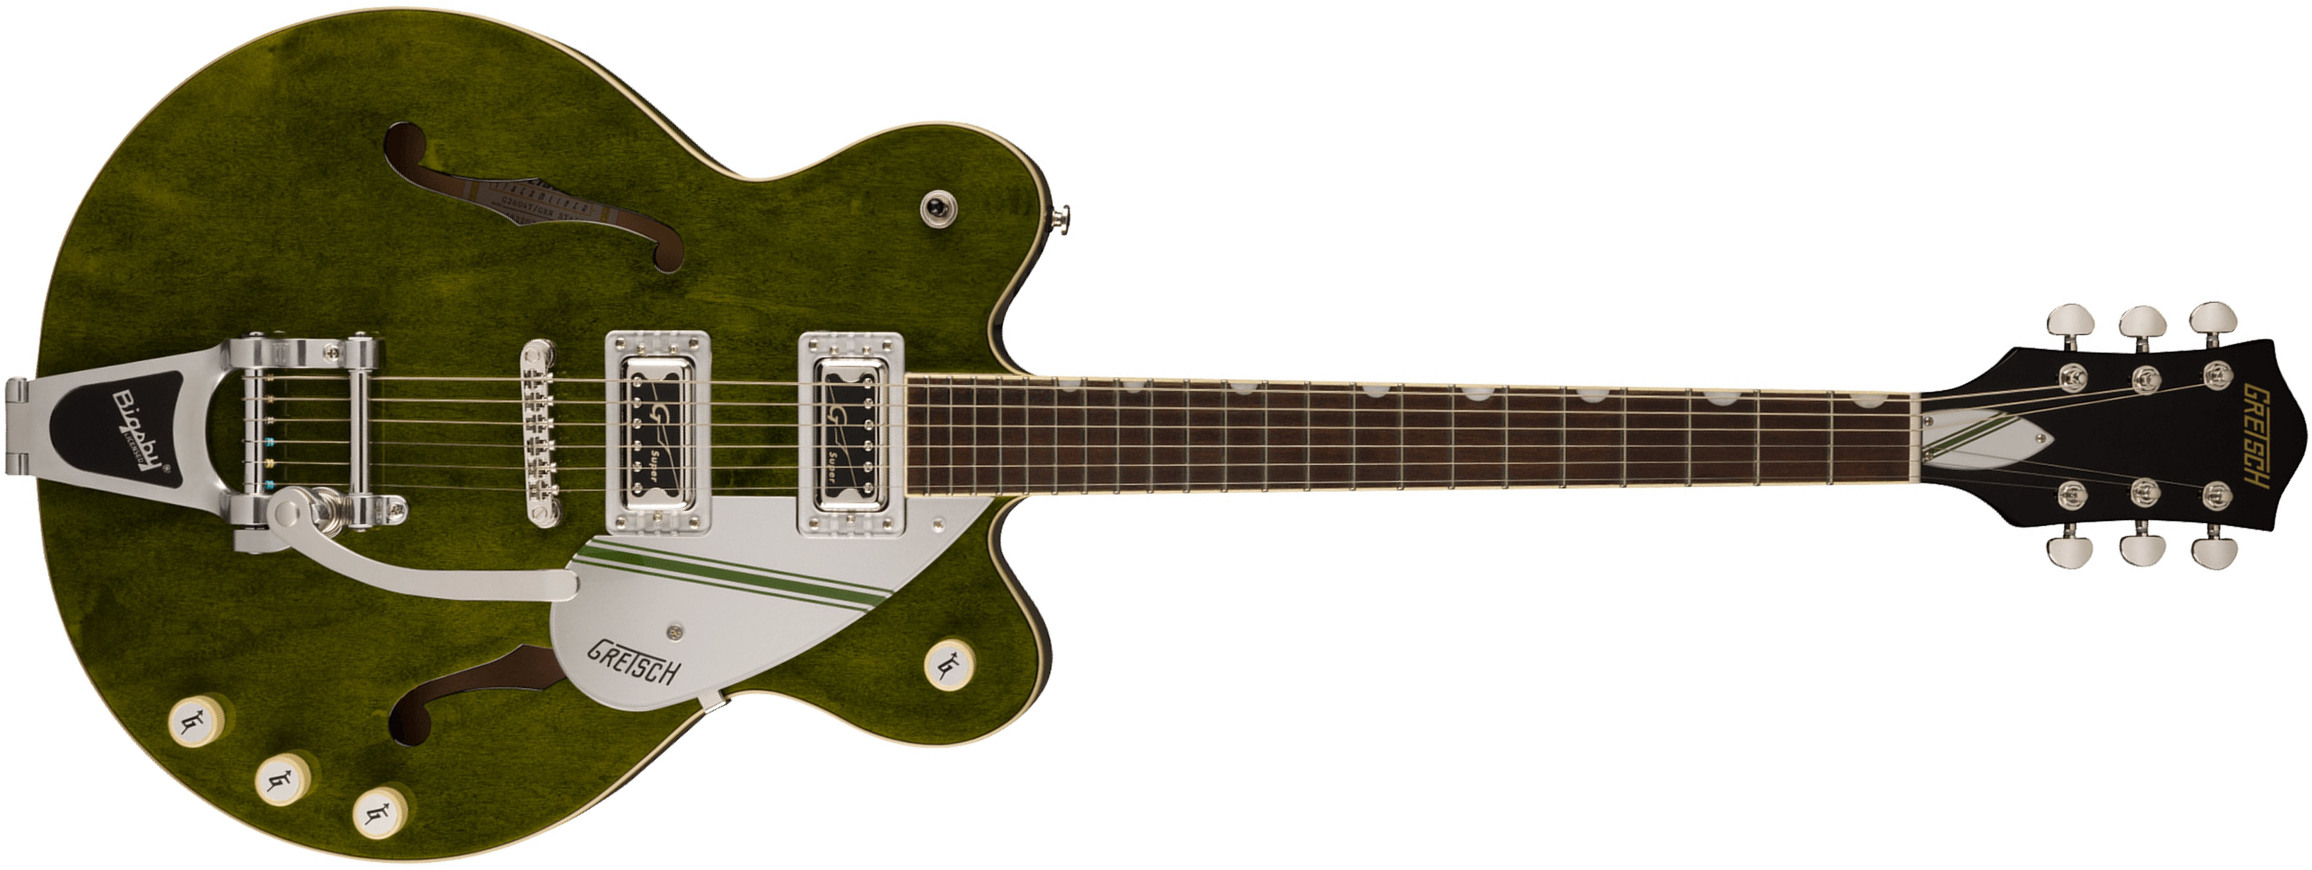 Gretsch G2604t Streamliner Rally Ii Center Block Dc Bigsby 2h Trem Lau - Rally Green Stain - Guitare Électrique 1/2 Caisse - Main picture